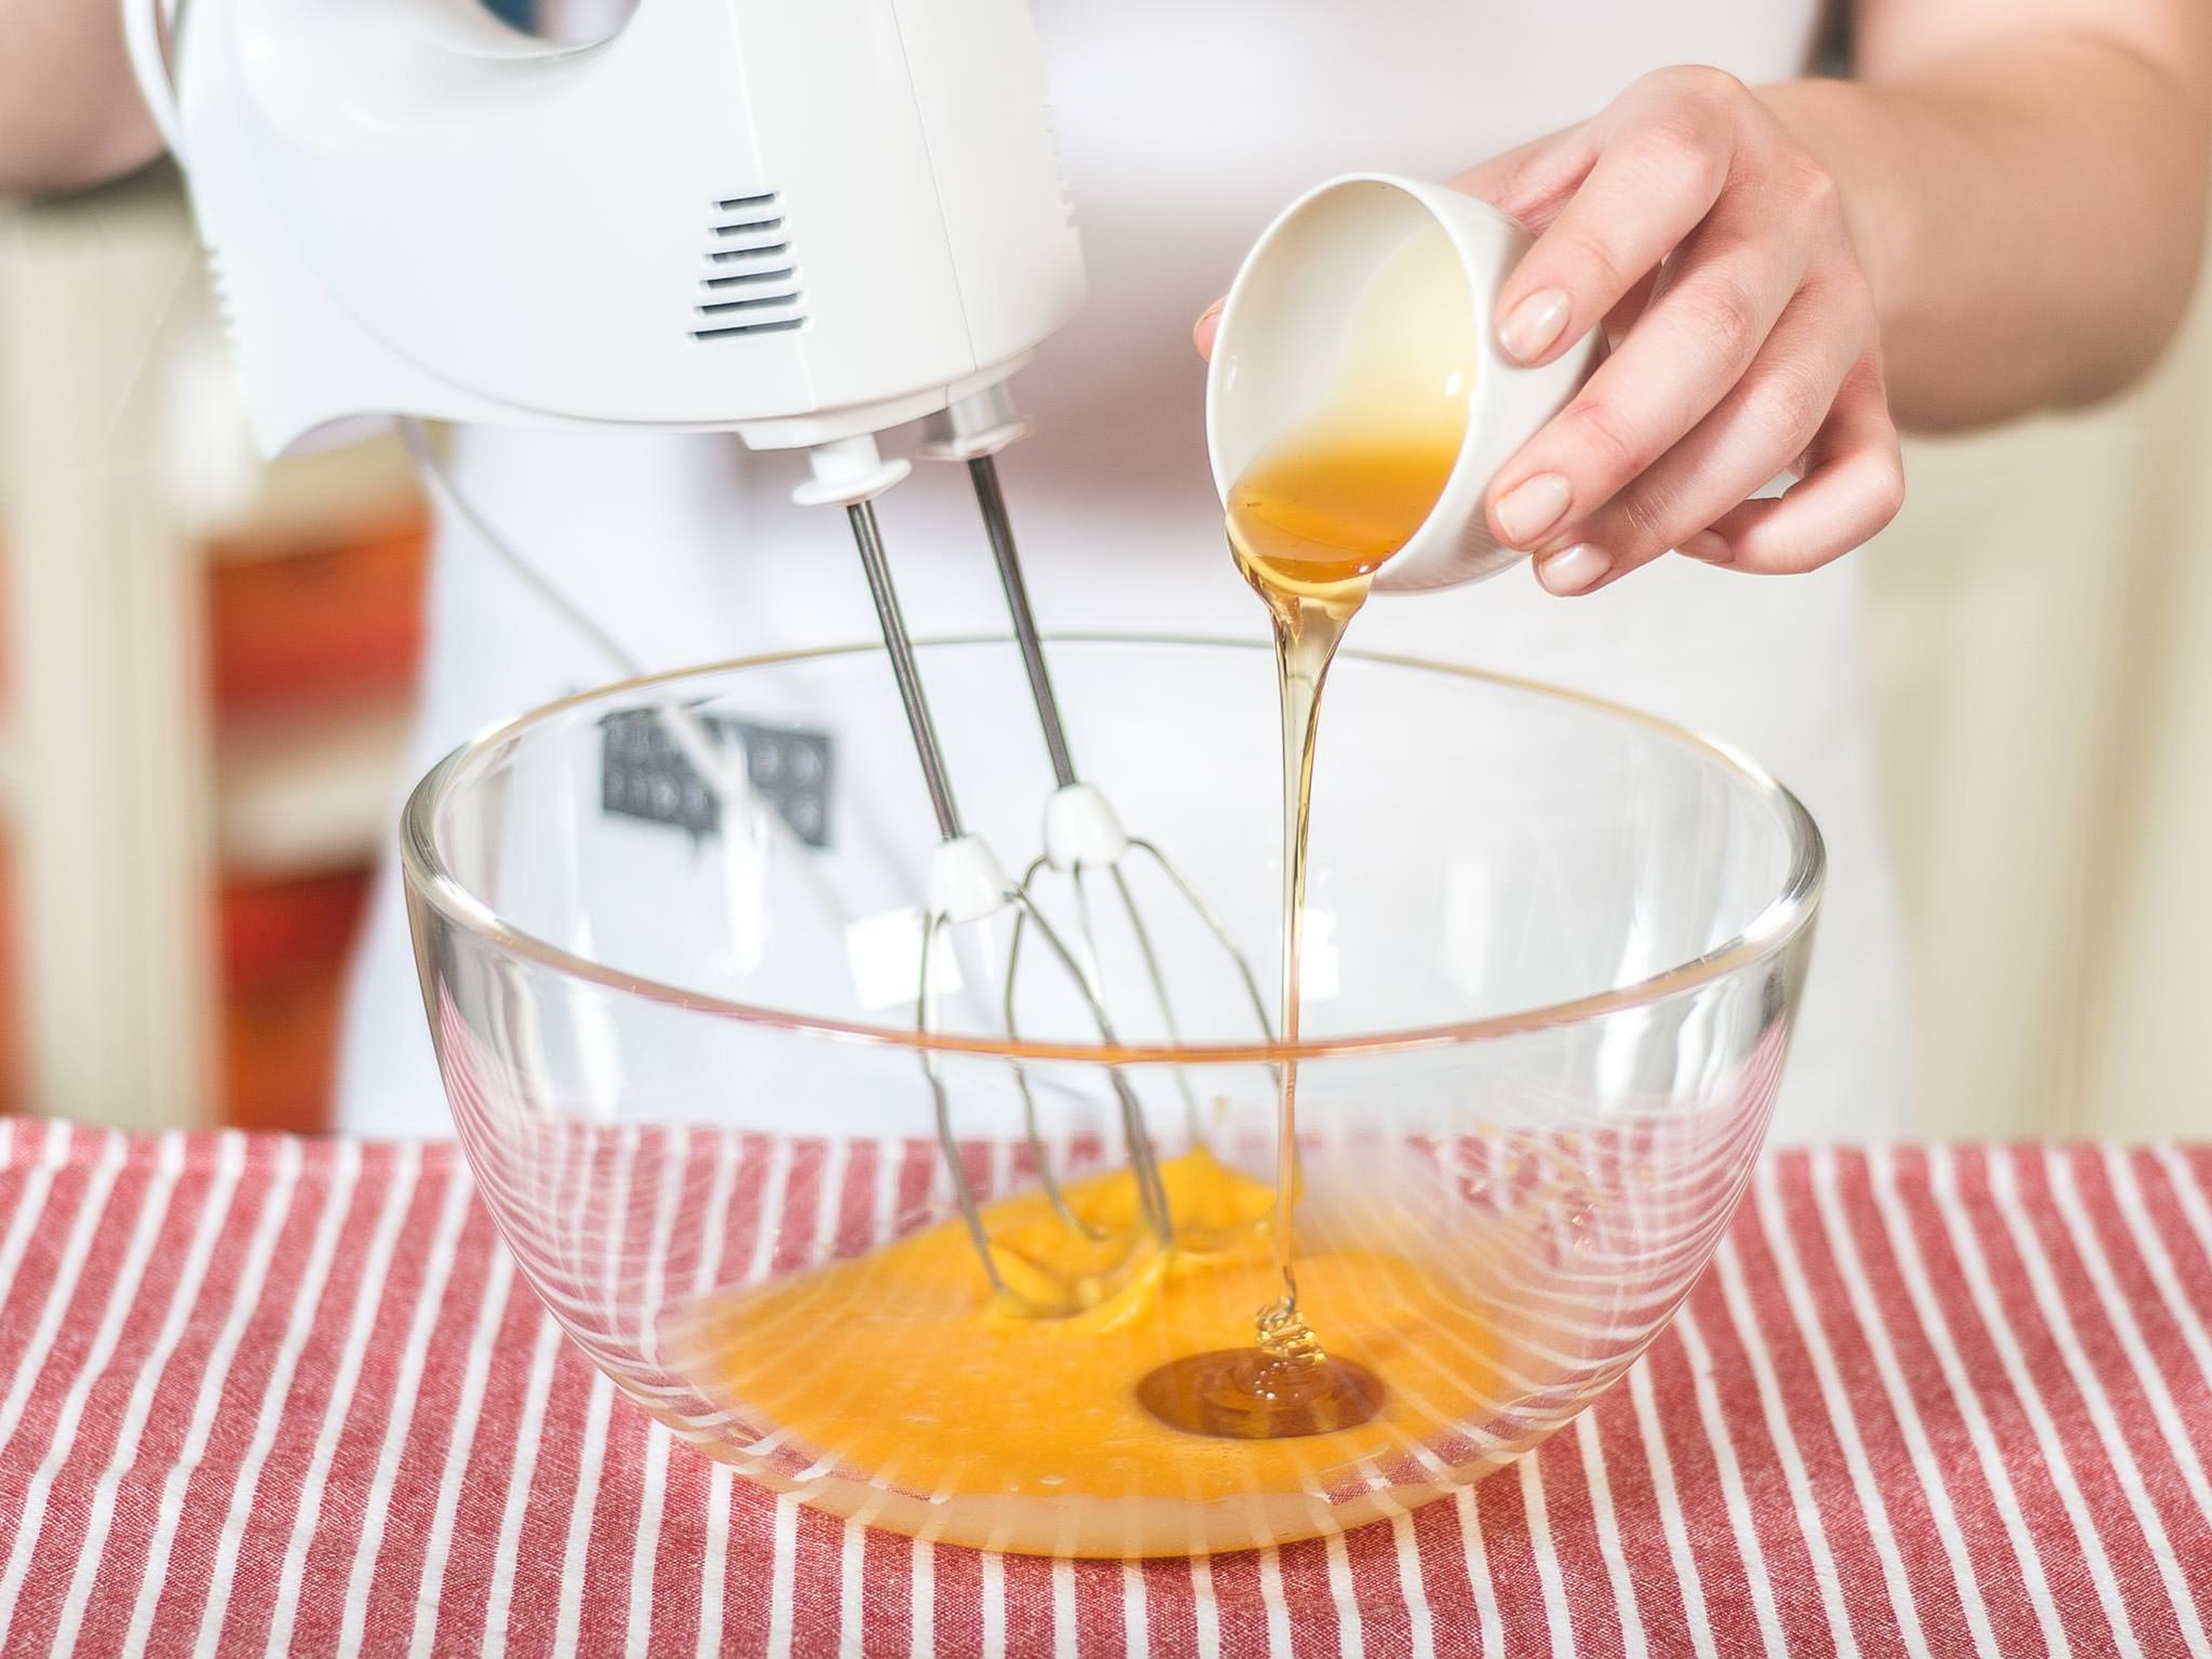 Whisk egg yolks and honey together until fluffy. Stir in Grand Marnier and a pinch of salt.